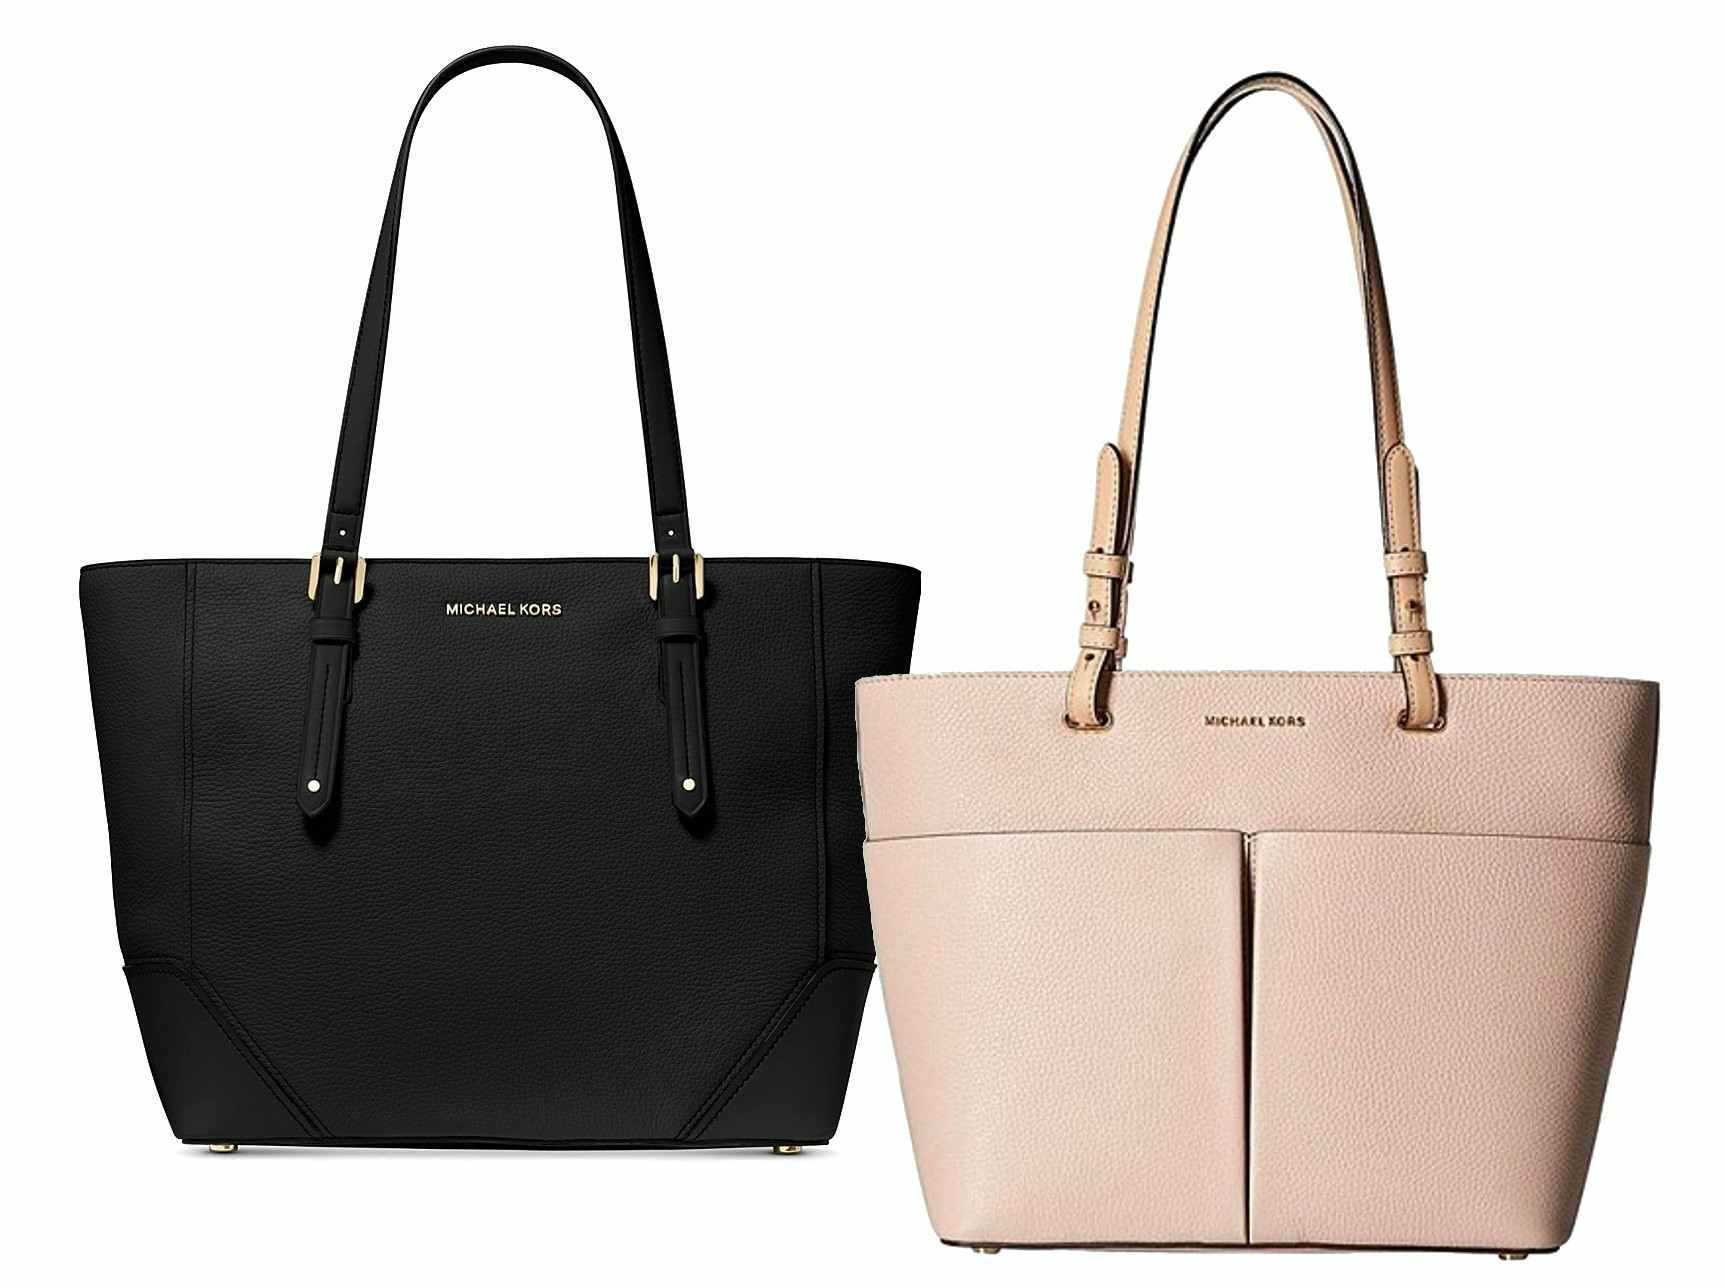 zulily-michael-kors-tote-2022-1